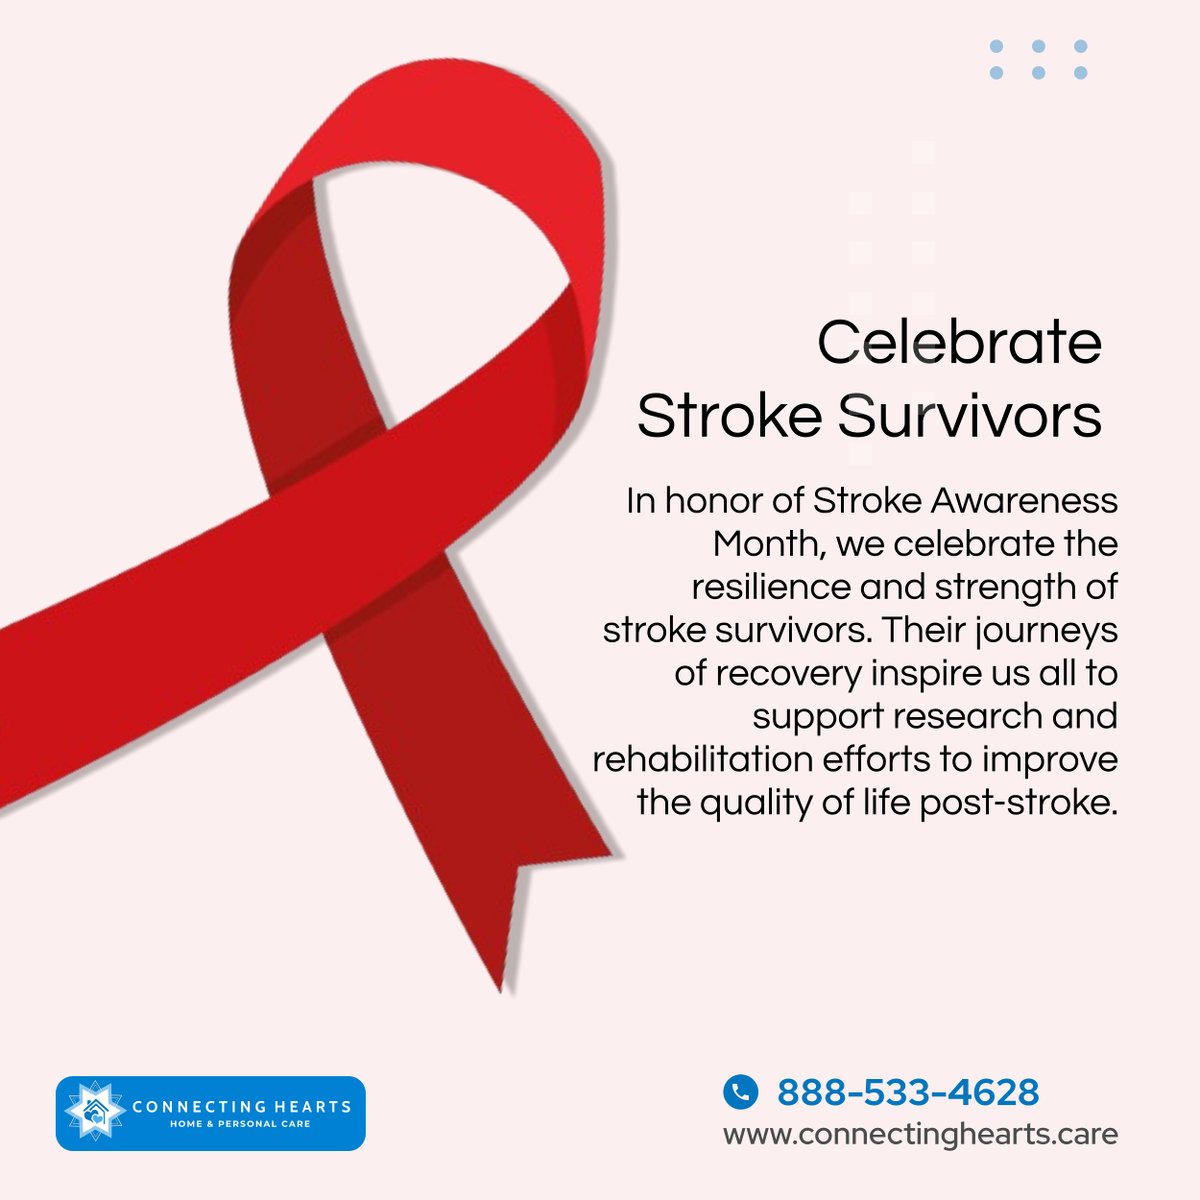 Every survivor's story is a testament to courage and resilience. 

This month, let’s acknowledge the challenges faced by stroke survivors and reaffirm our commitment to providing support and hope for recovery. 

#StrokeSurvivor #StrokeRehabilitation #StrokeAwarenessMonth